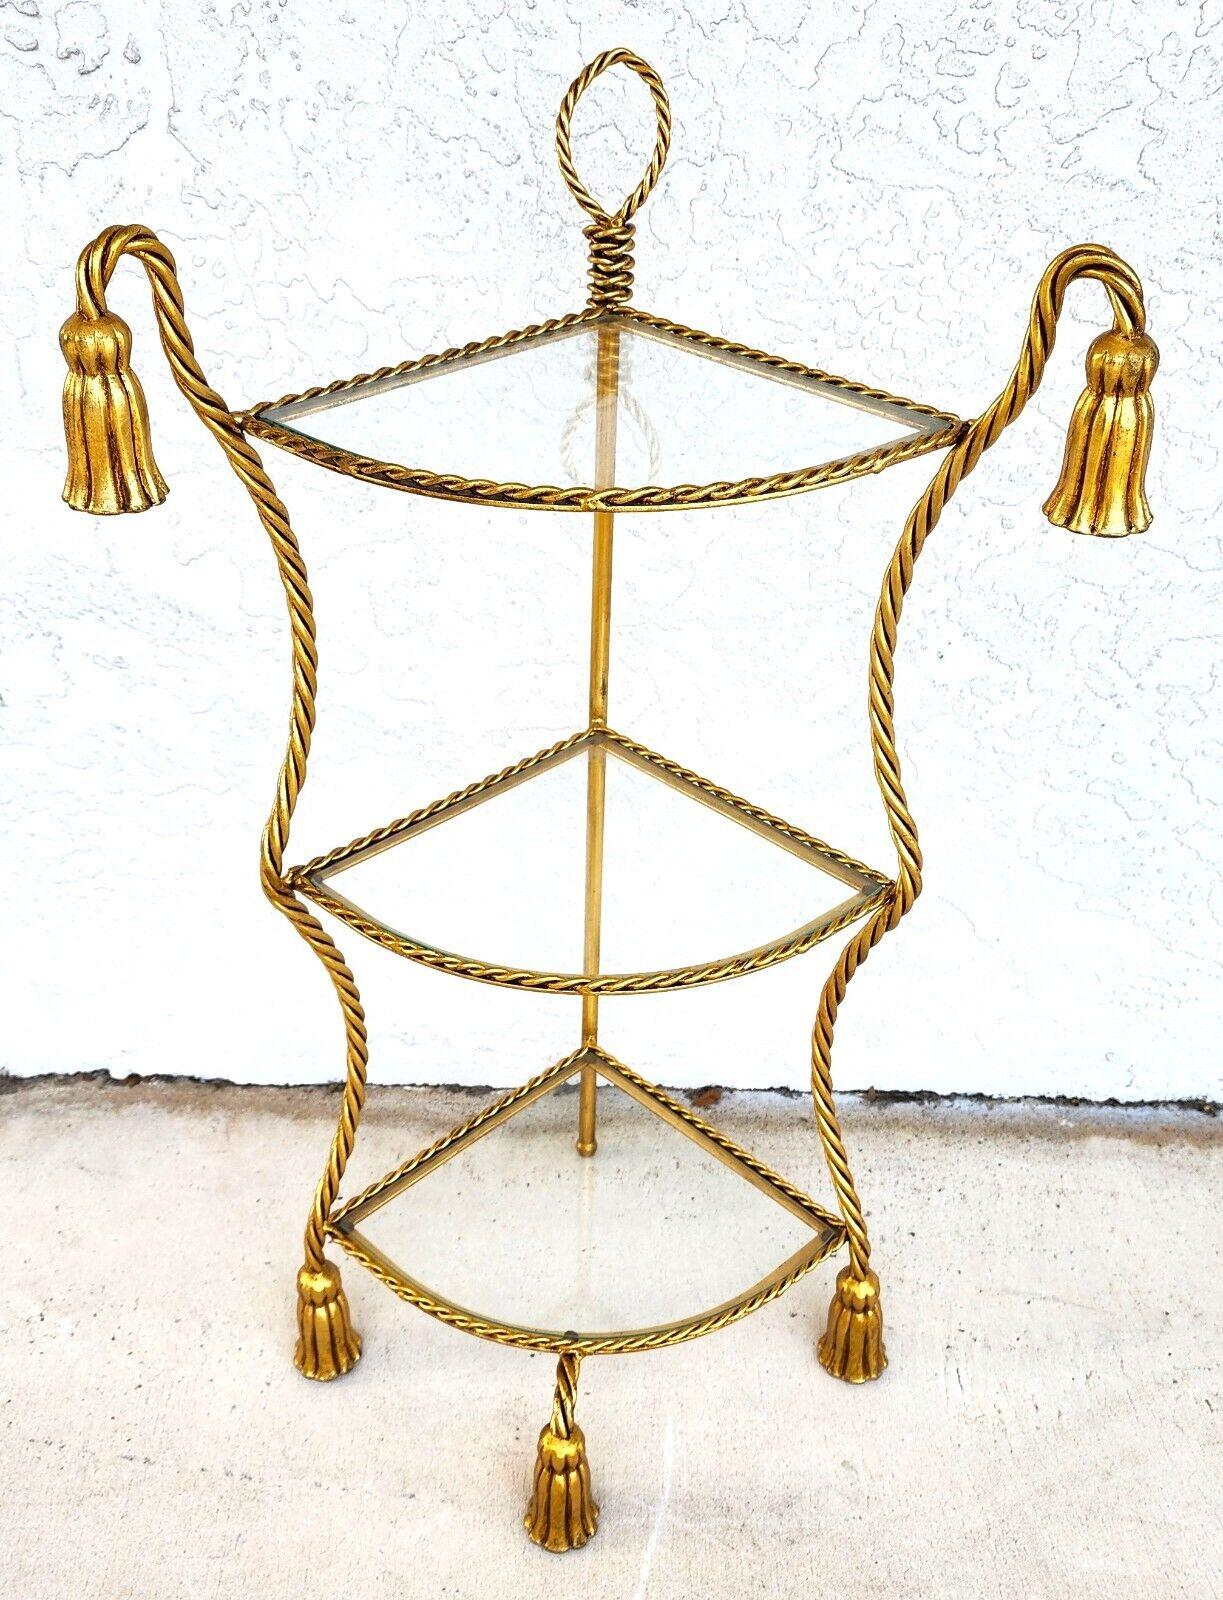 For FULL item description click on CONTINUE READING at the bottom of this page.

Offering One Of Our Recent Palm Beach Estate Fine Furniture Acquisitions Of A
Vintage Gilt Metal & Glass Corner Table Shelf Rope & Tassel
This can also be